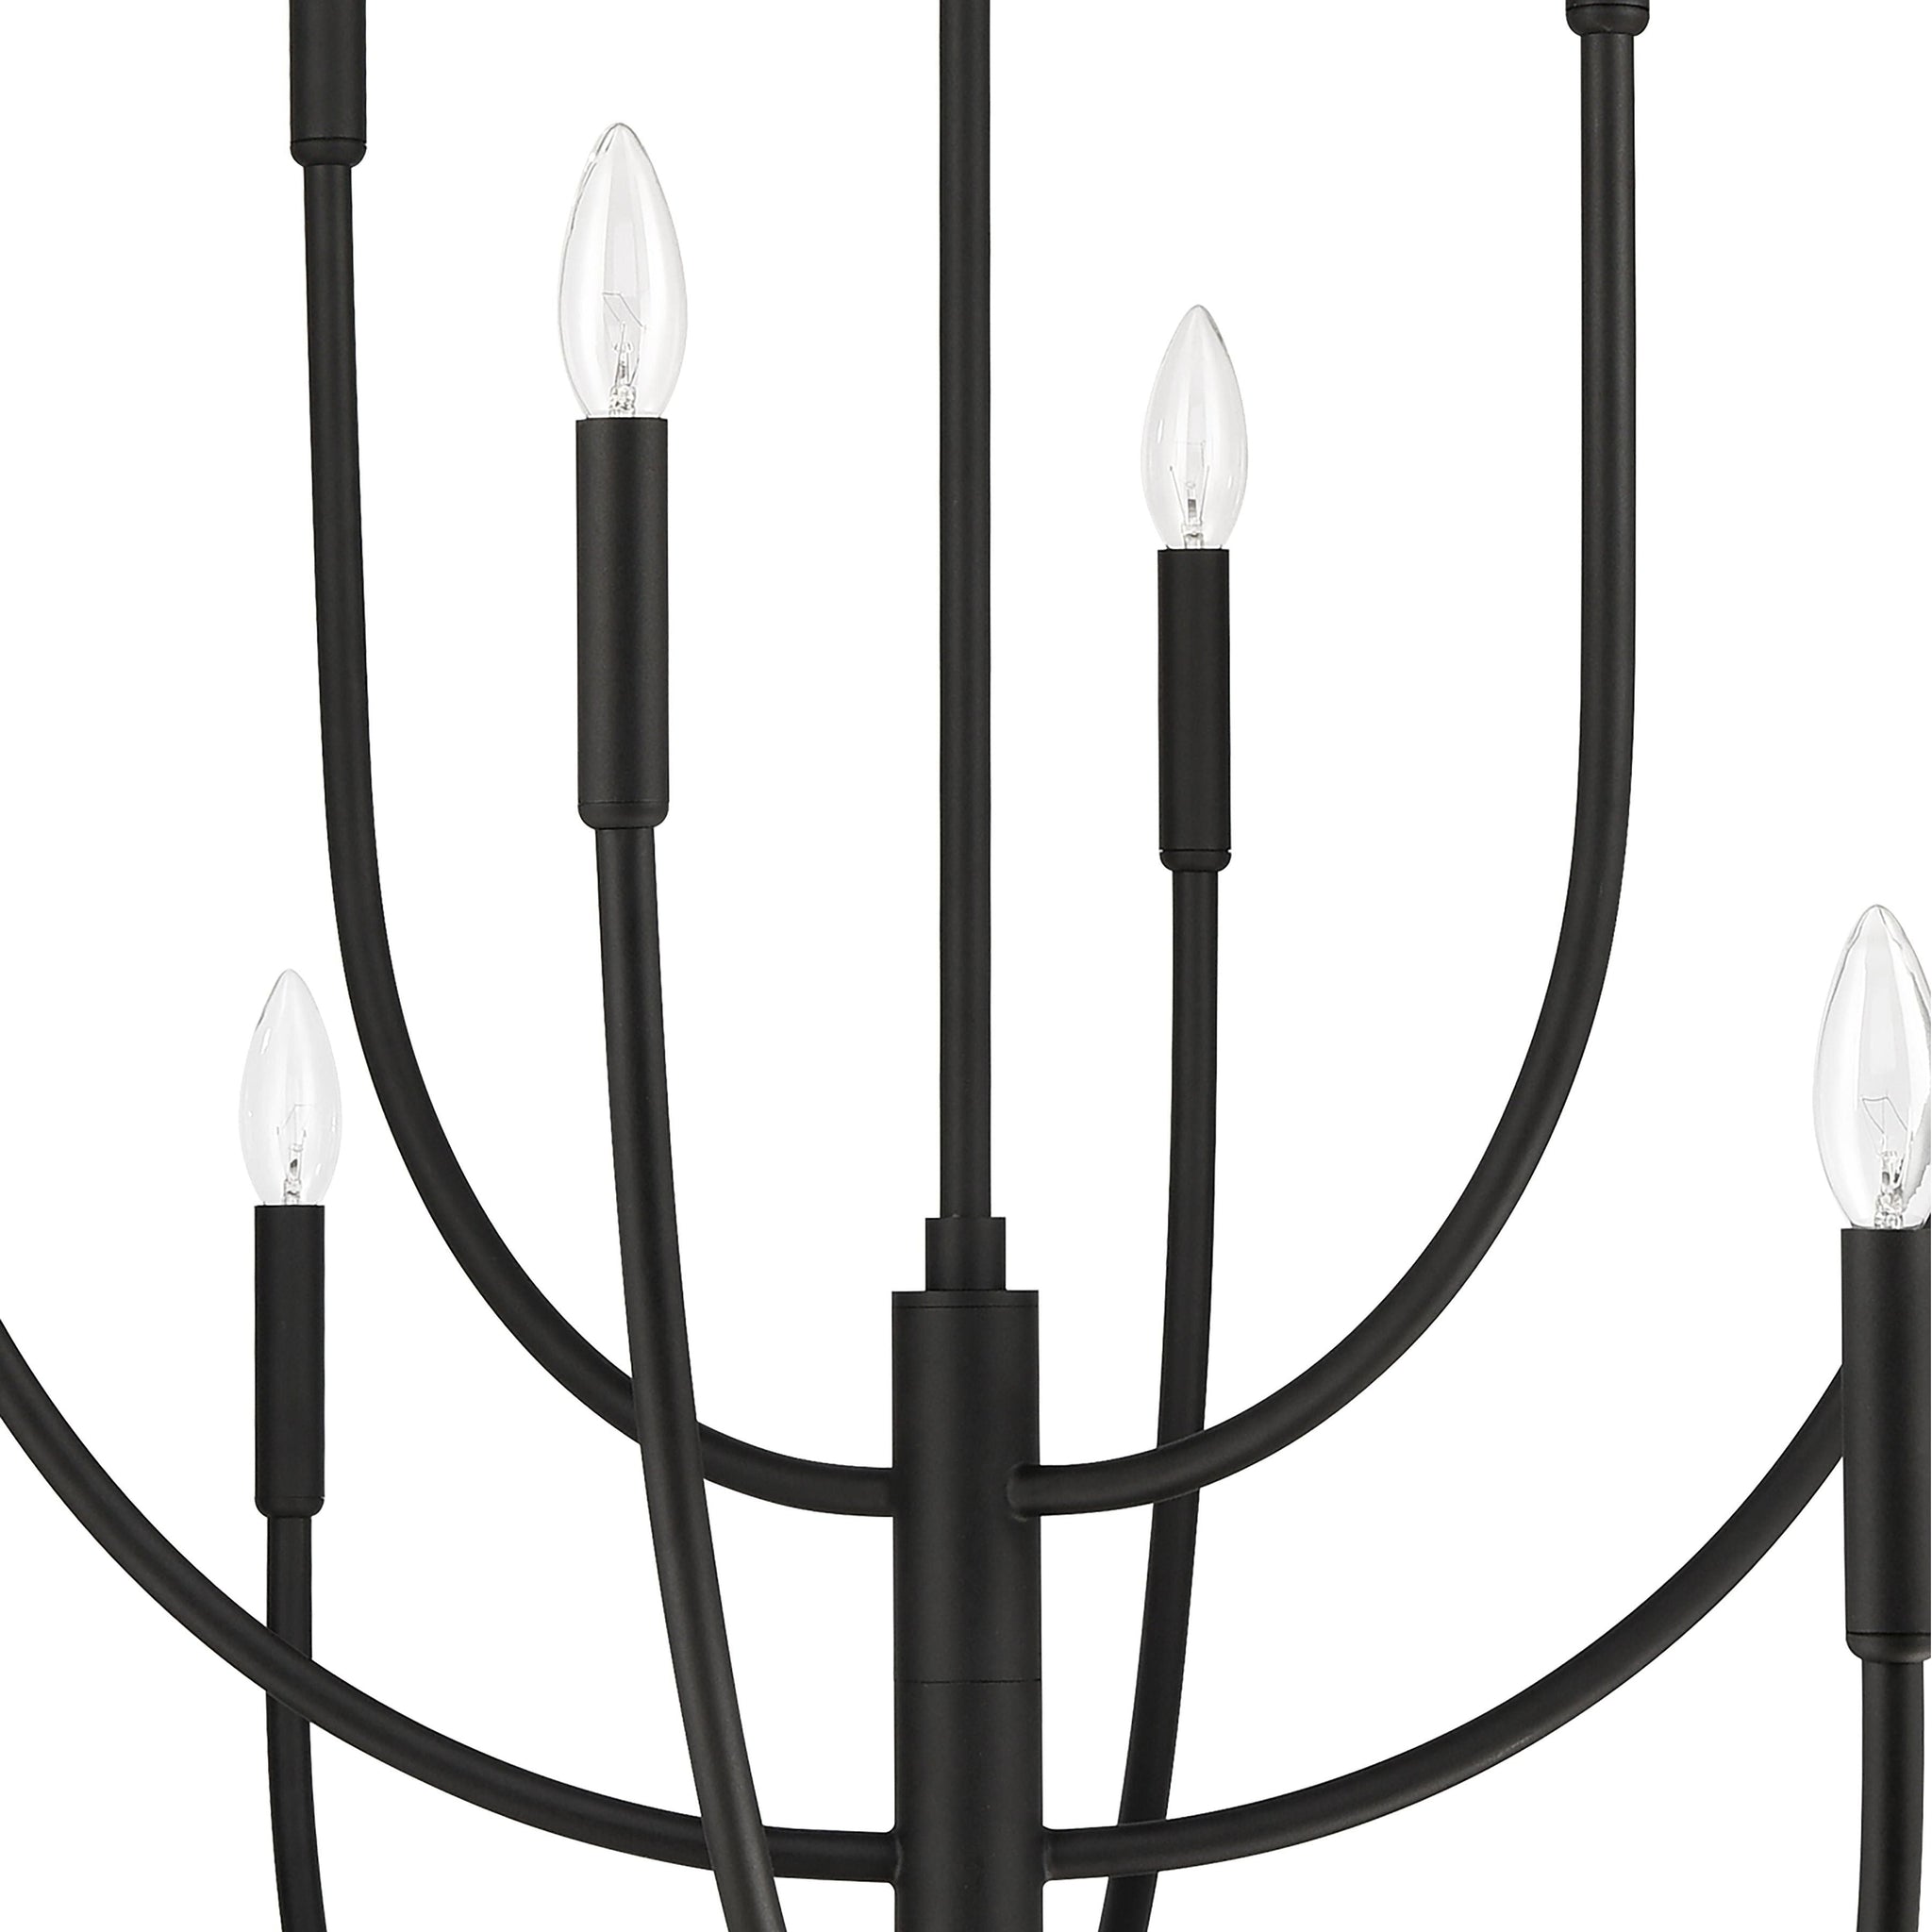 Continuance 42" Wide 10-Light Chandelier